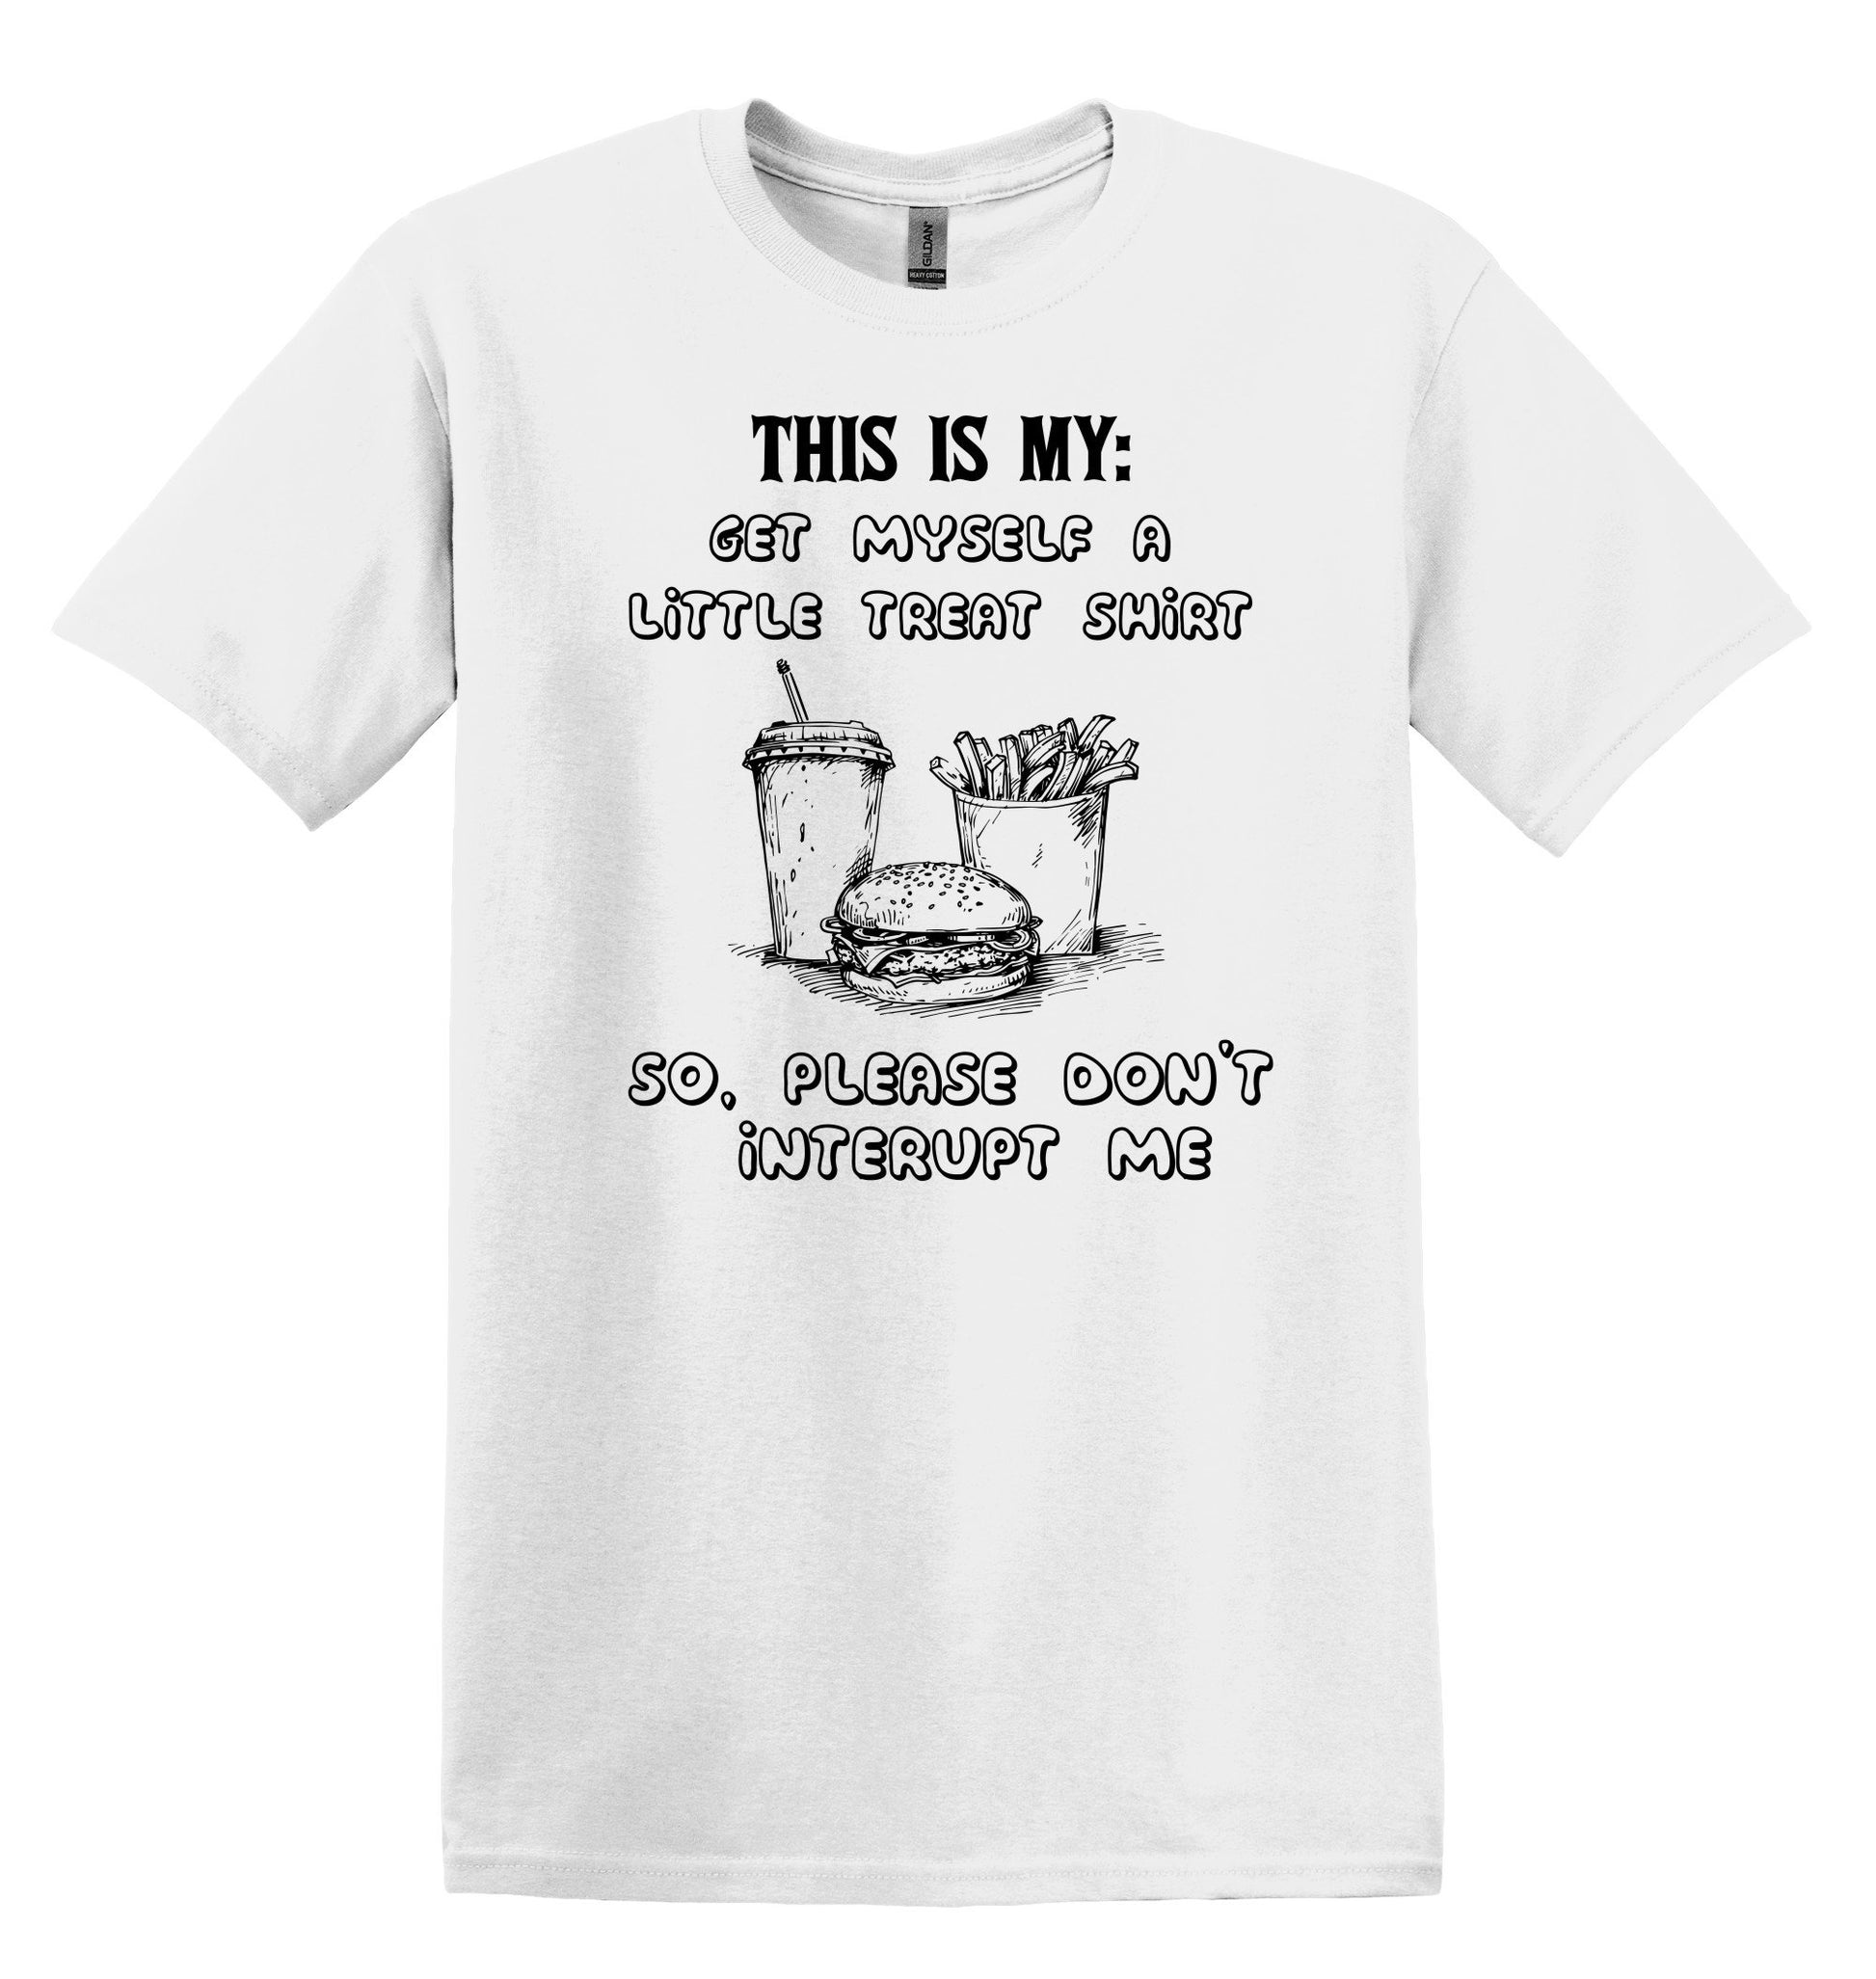 This is My: Get myself another Trreat Shirt Shirt - Funny Graphic Tee